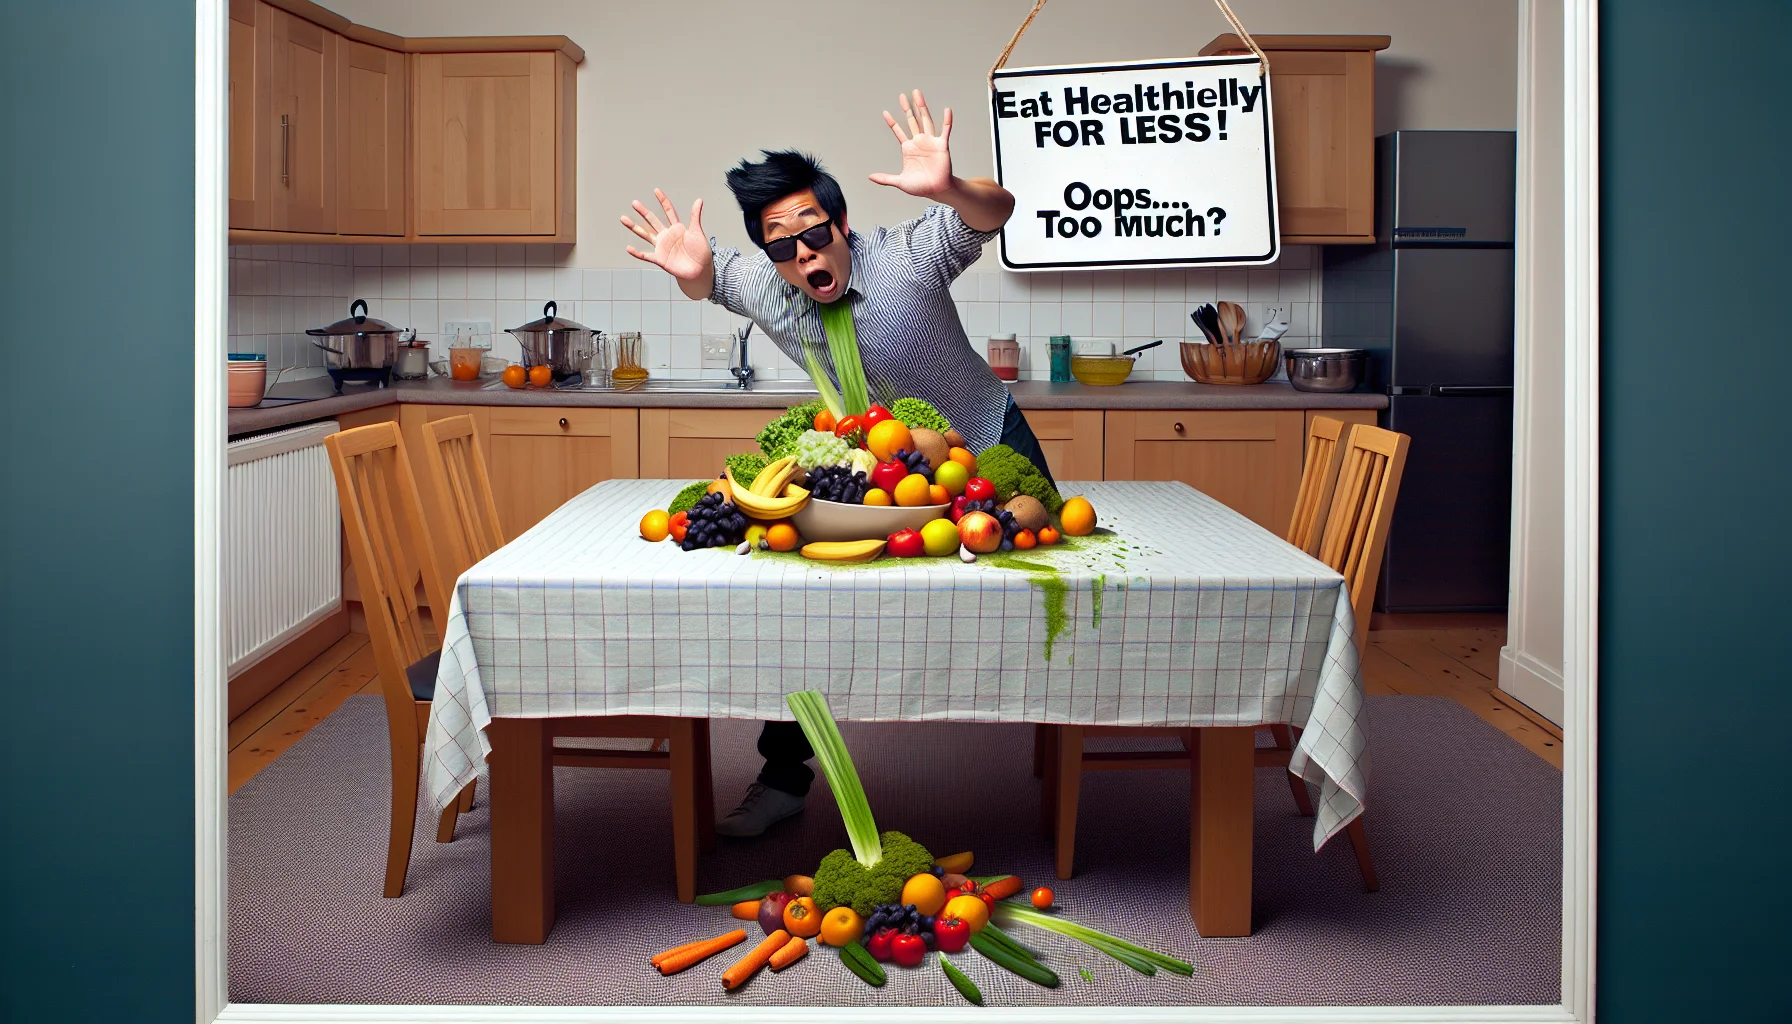 Create a detailed image capturing a humorous scenario where an unknown guest contributor is in a kitchen. The guest is an East-Asian man, dressed in casual attire, with an exaggerated, apologetic expression. He's mistakenly tipped over a large bowl of fresh, colorful fruits and vegetables onto a neatly set dining table. The scene is comedic, yet it carries the strong message of the affordability and importance of healthy eating. Place a witty sign in the scene that reads, 'Eat healthily for less! Oops... too much?'.